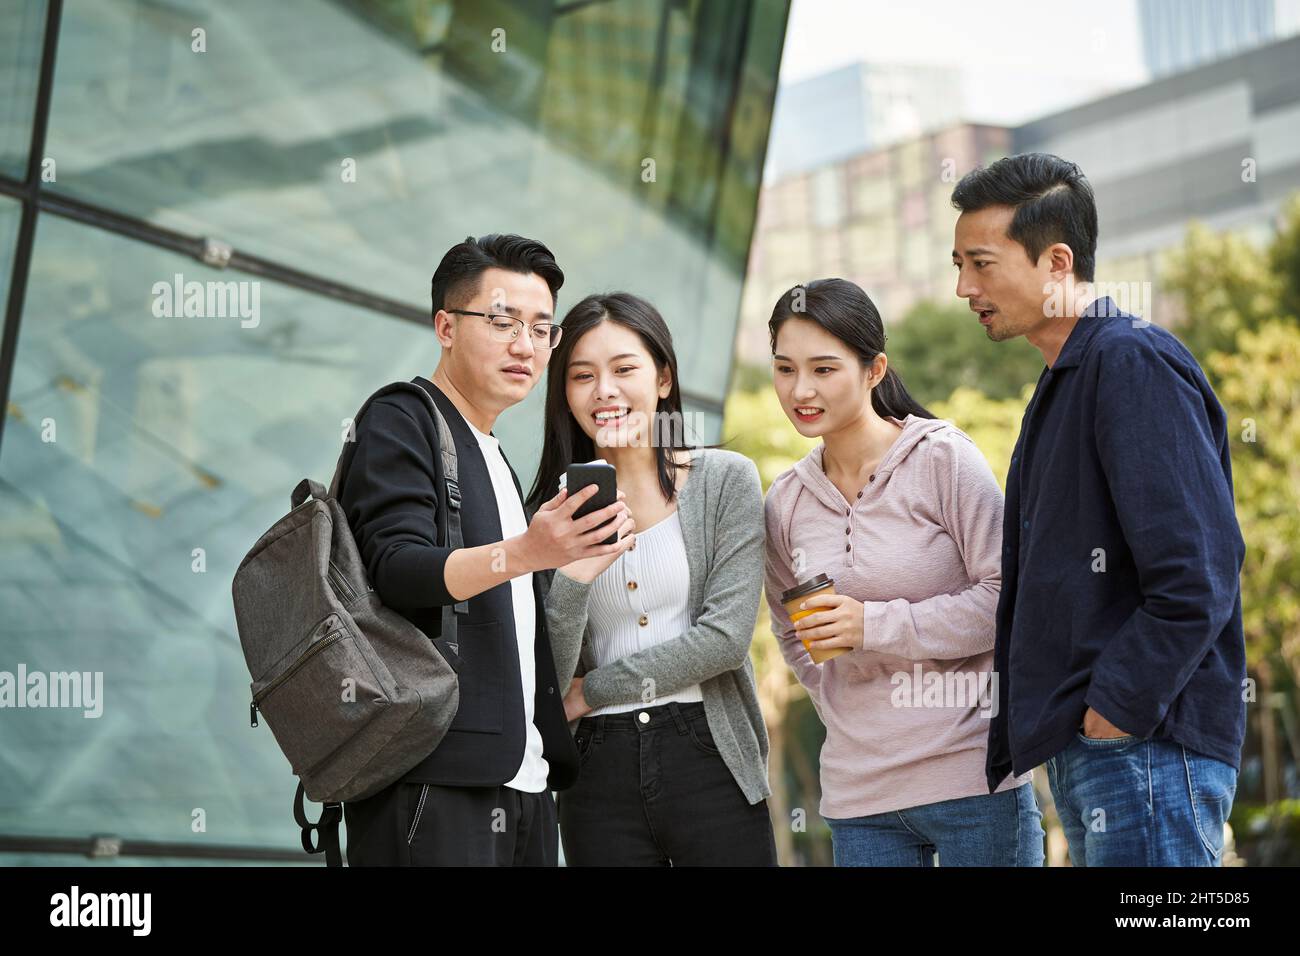 group of young asian people looking at cellphone together outdoors happy and smiling Stock Photo